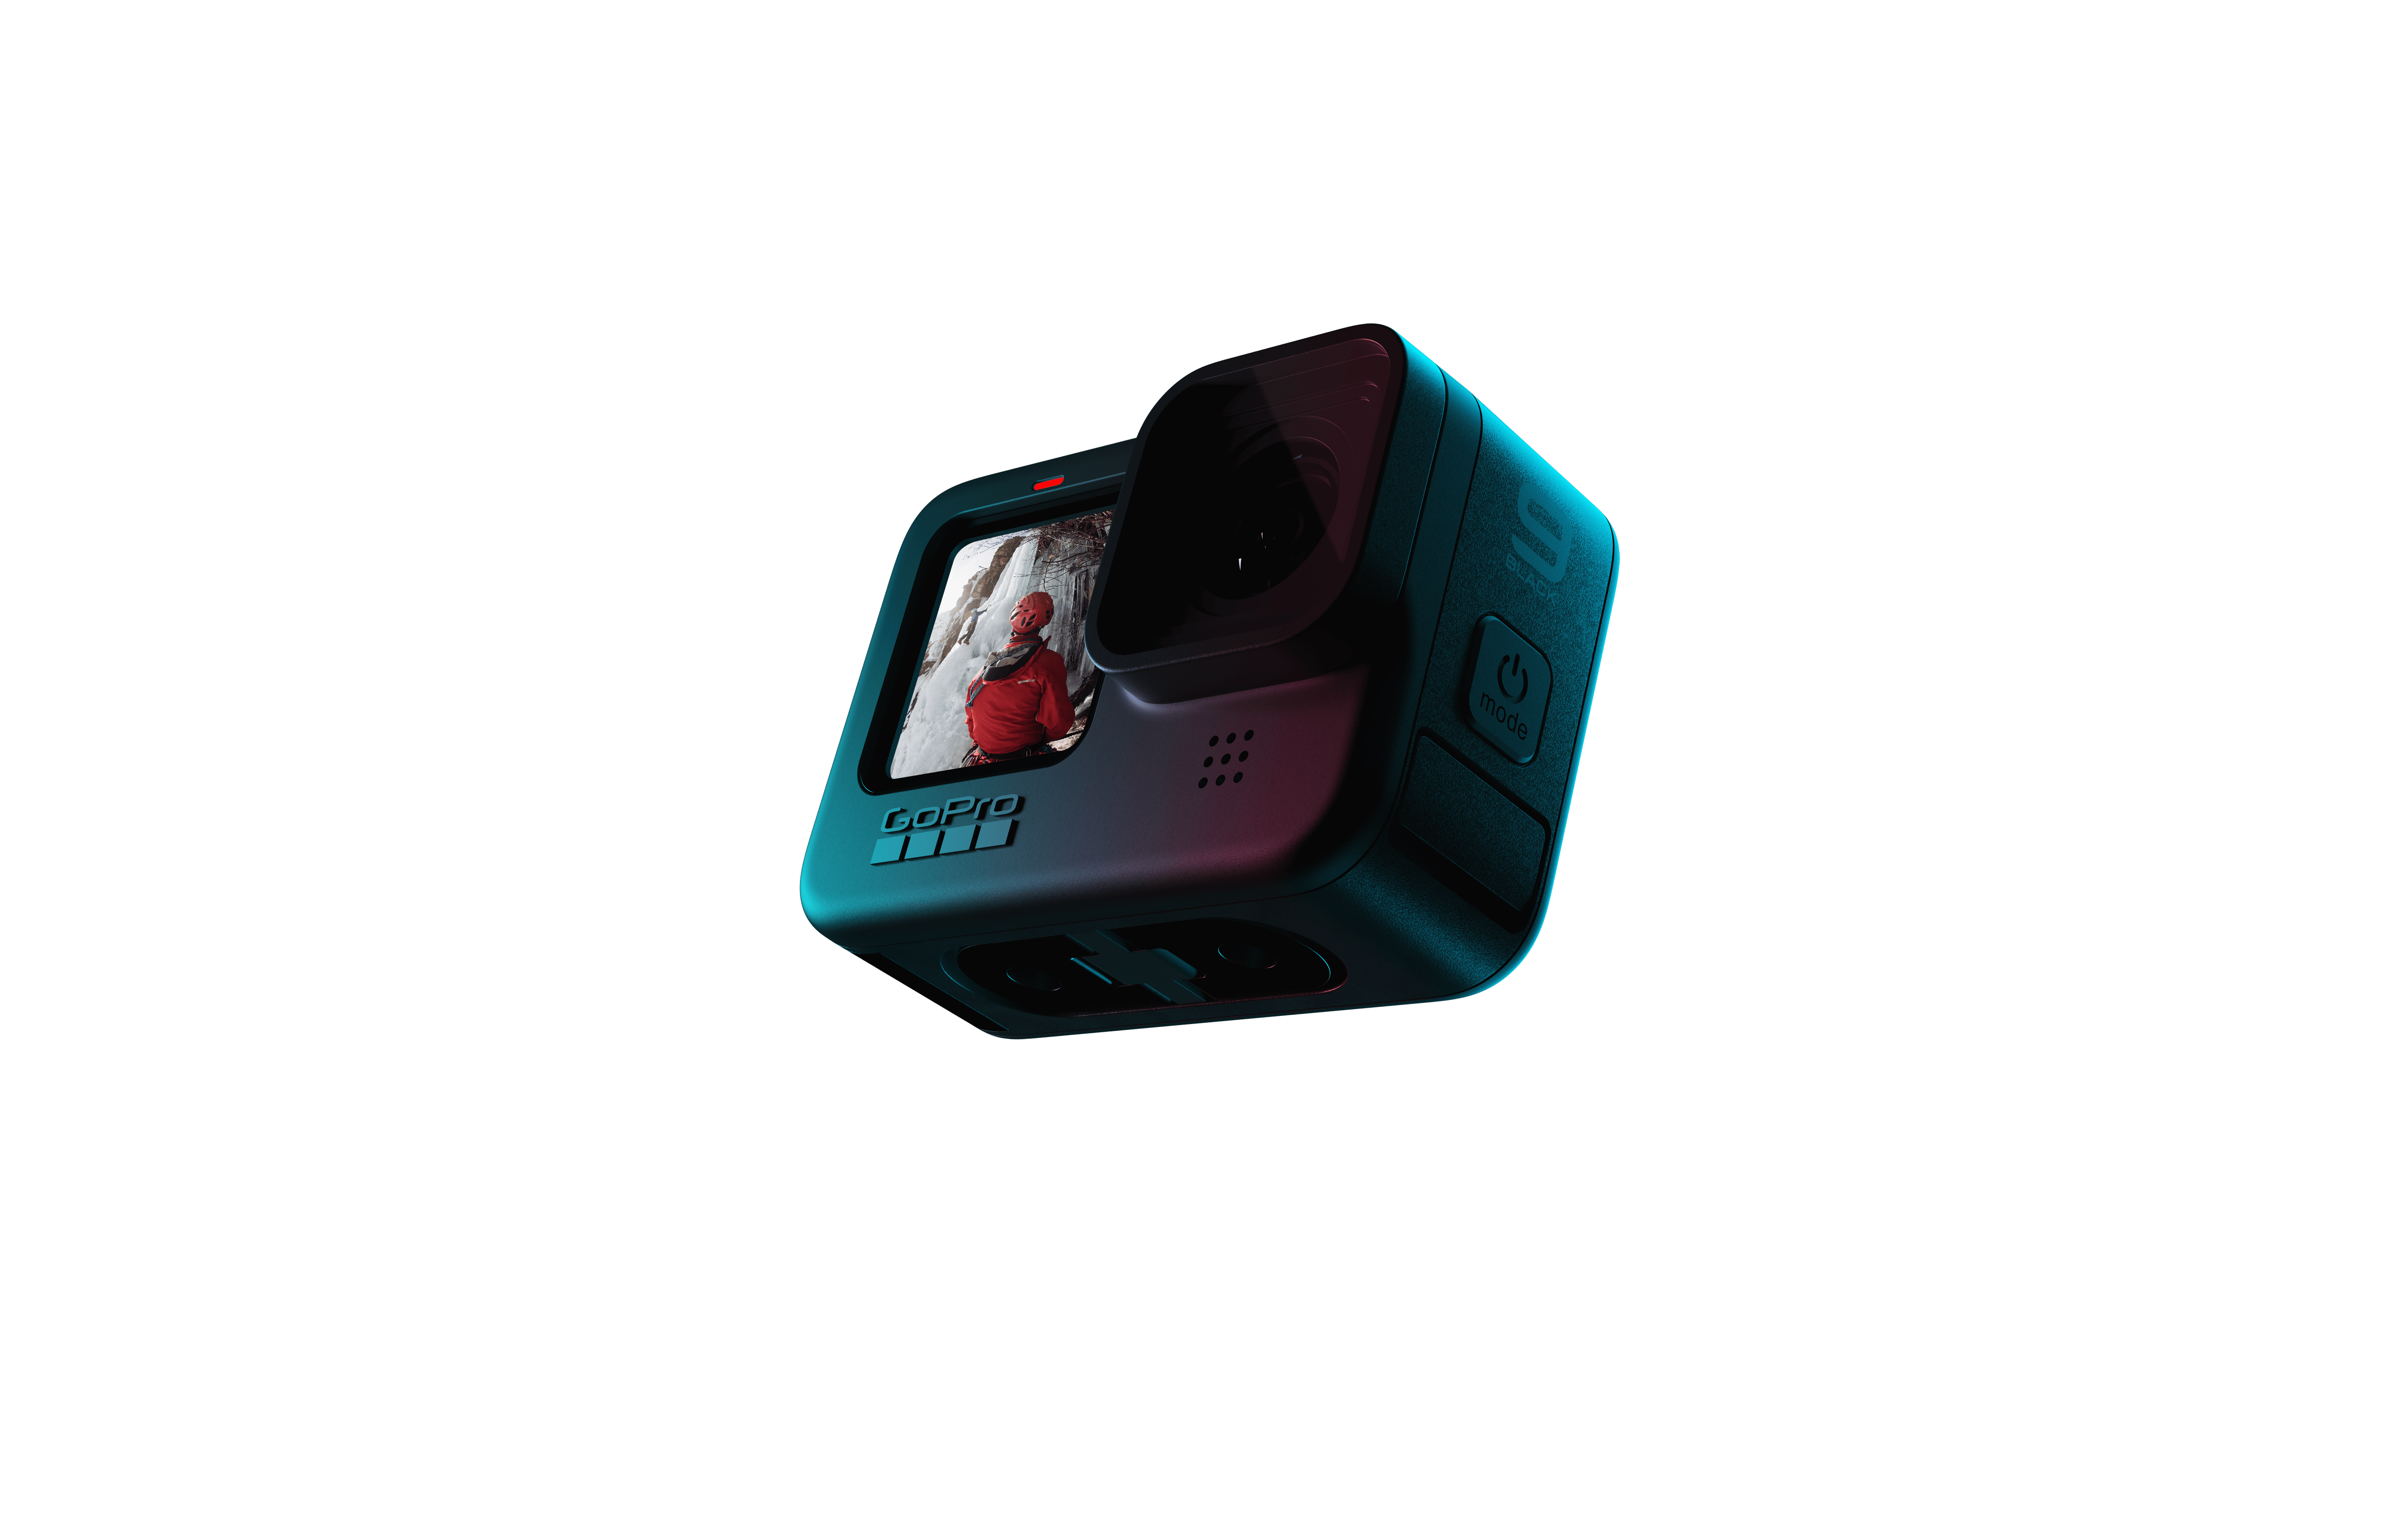 GoPro Hero9 Black can capture 5K videos and 20MP photos